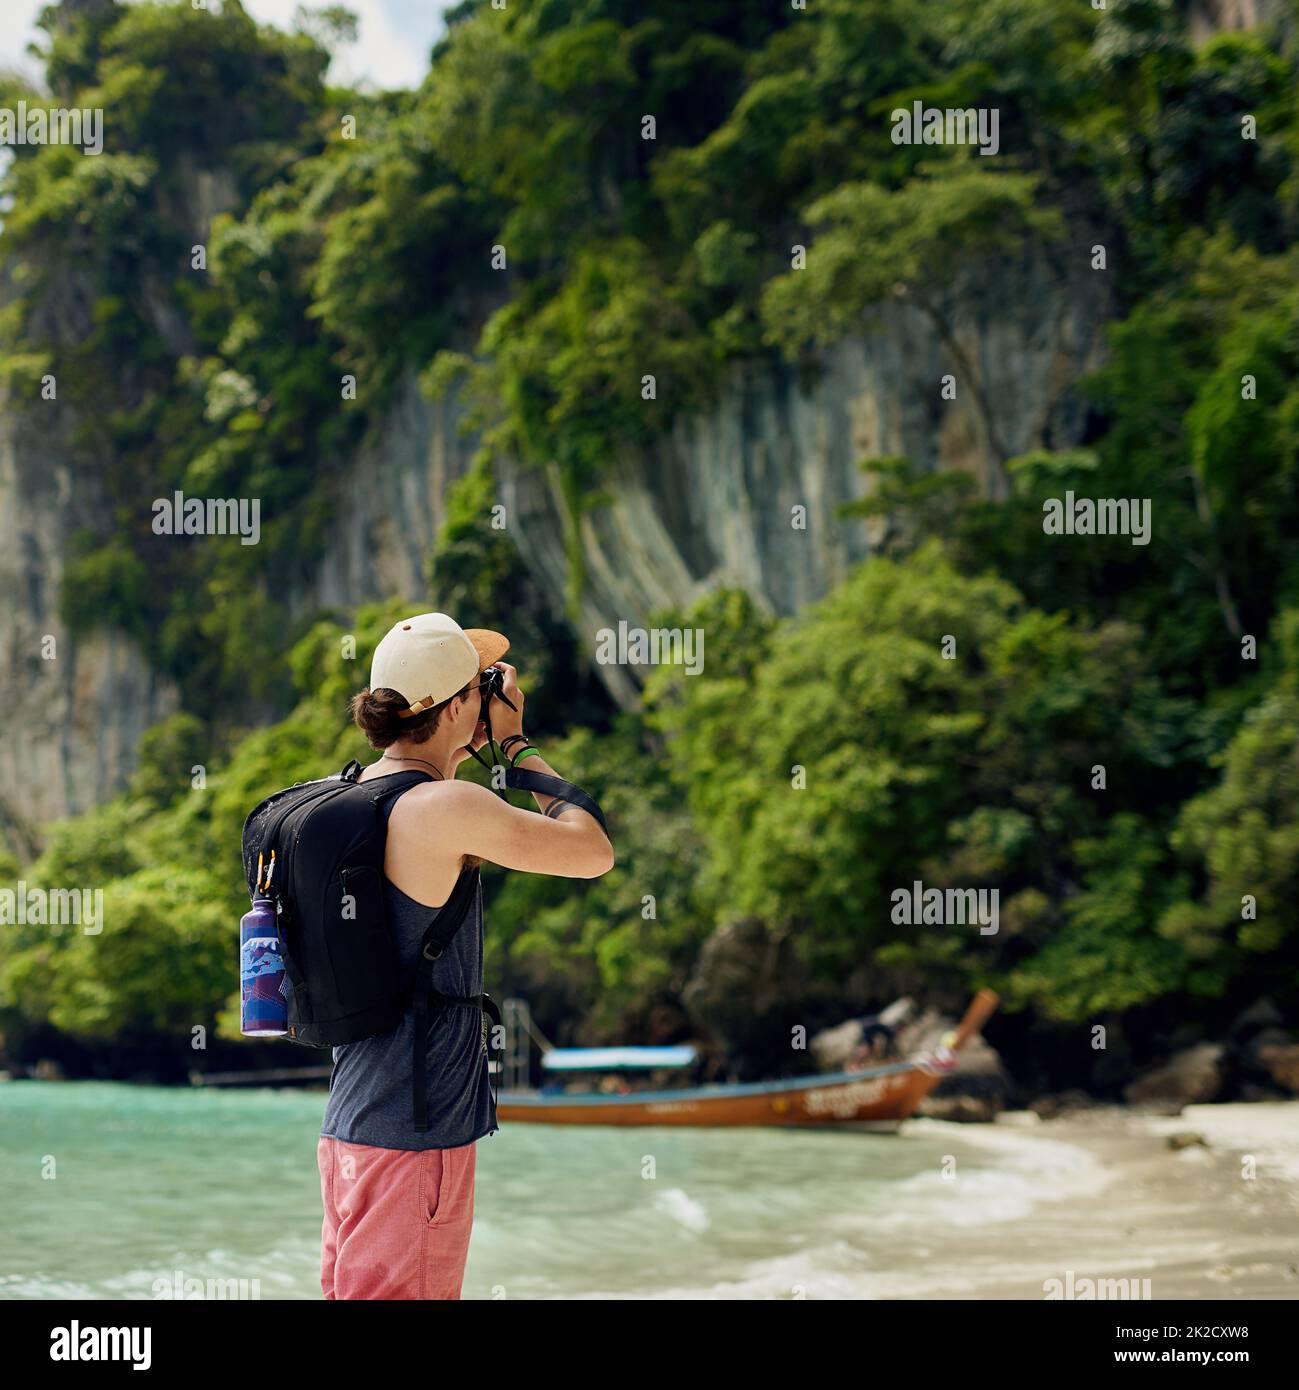 Capturing the beauty of nature. Cropped shot of a young tourist taking photos while on vacation. Stock Photo